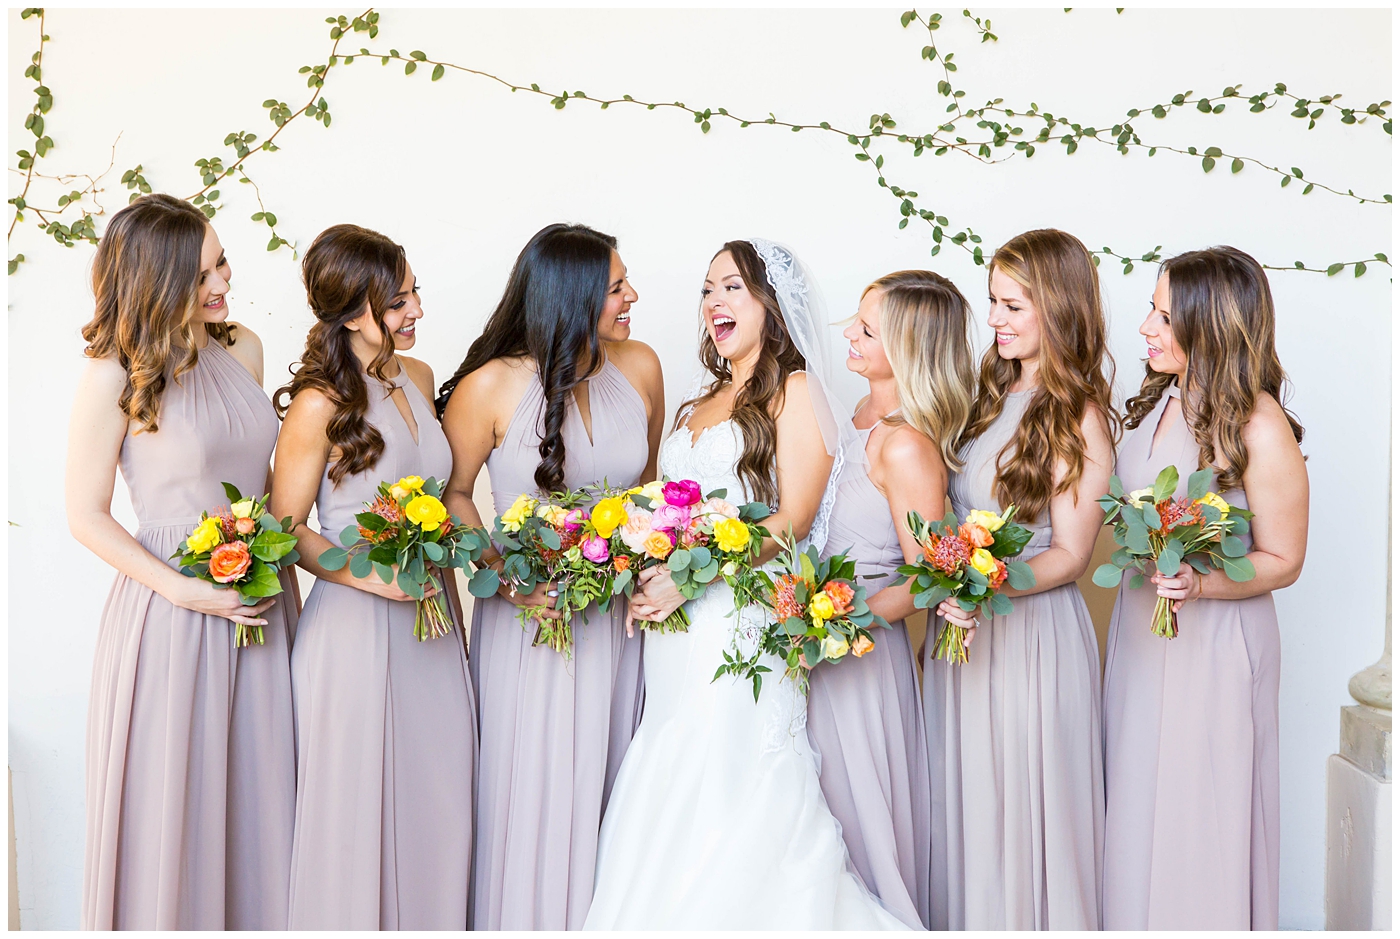 bride in lace cap sleeve wedding dress with bridesmaids in azazie dresses on wedding day with bright pink, yellow and green flower bouquets